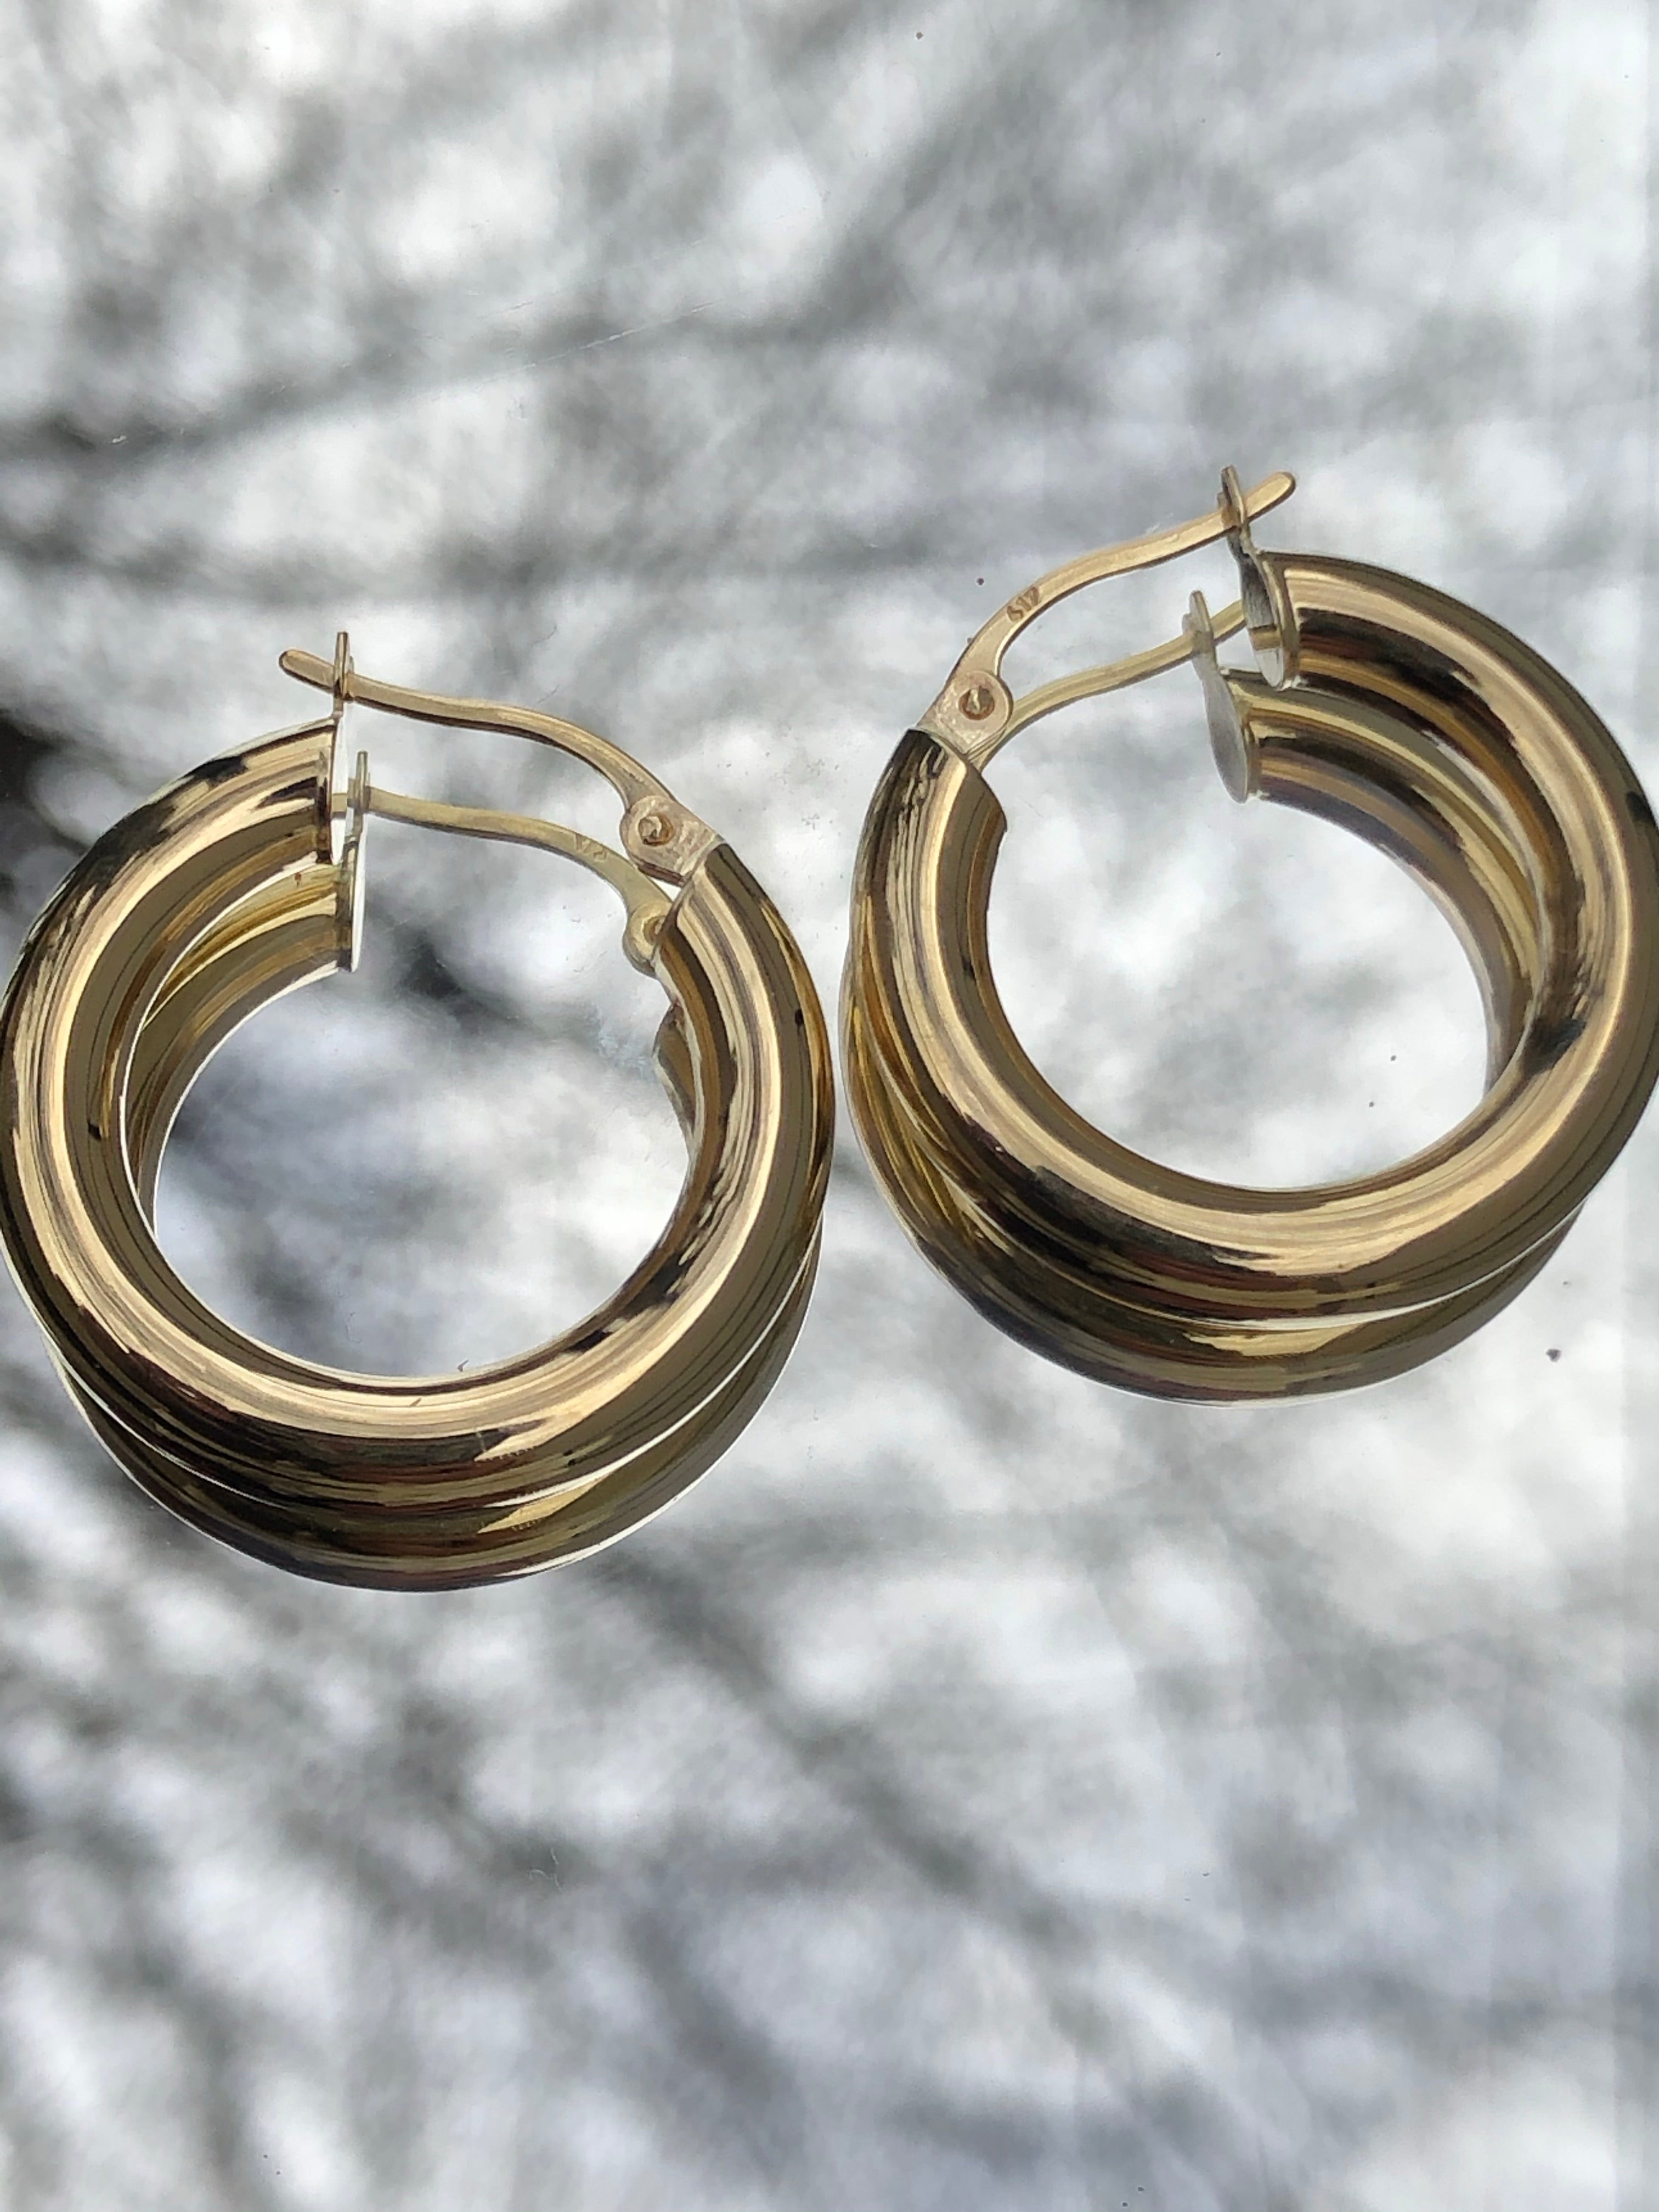 Thicc Hoop Earring | 3 SIZES | 10K Gold